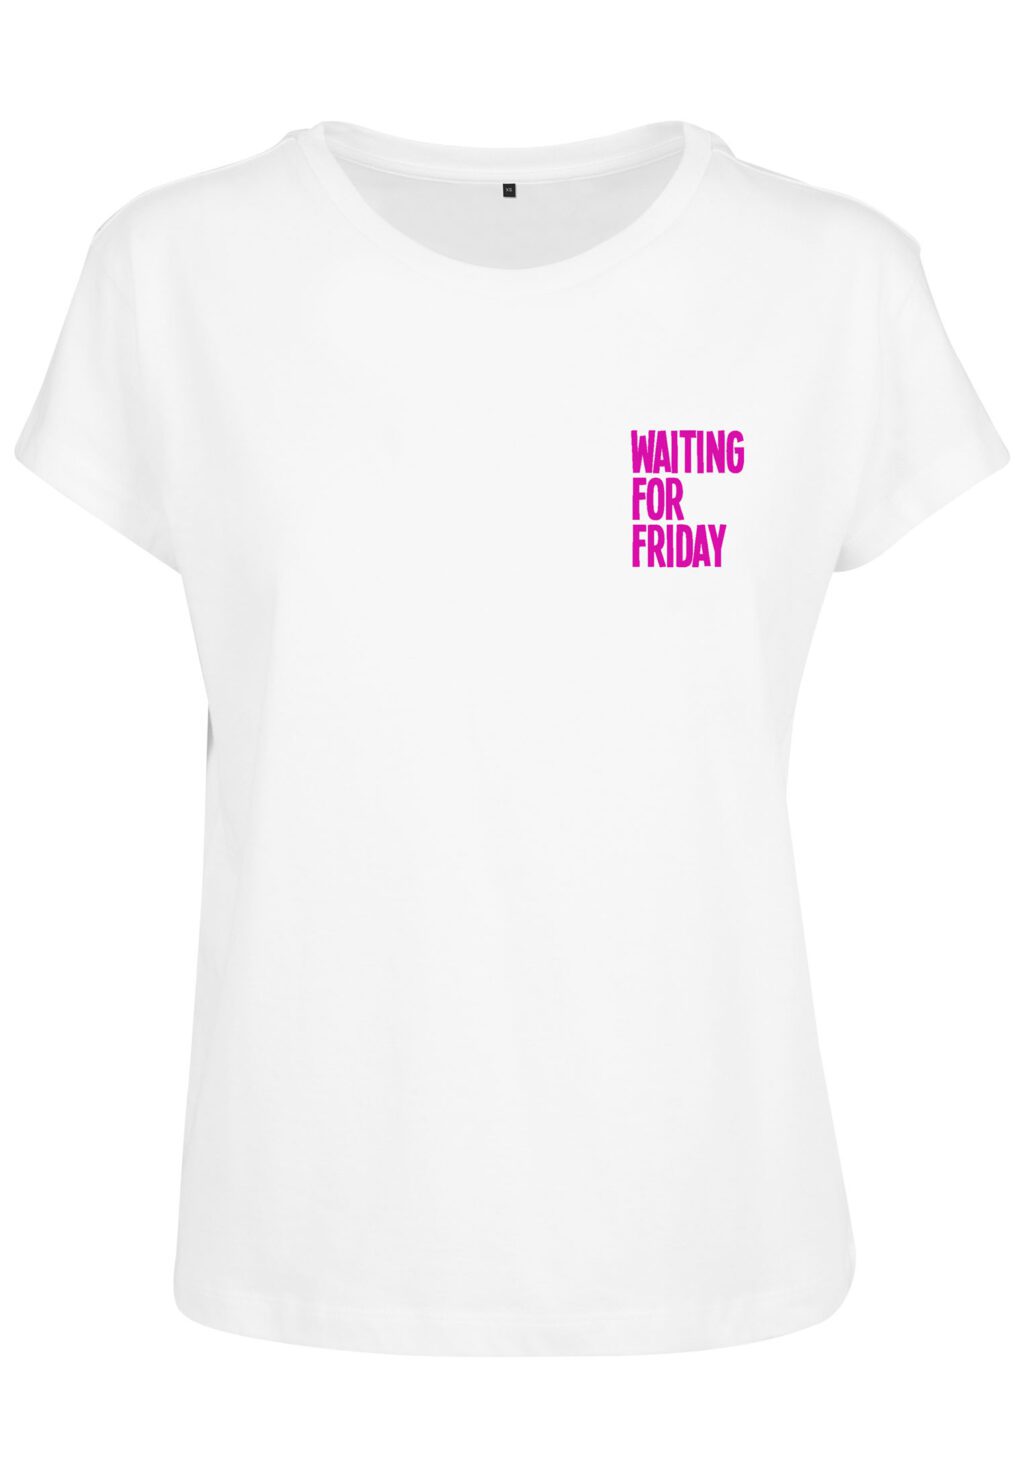 Waiting for Friday Tee white/pink MT735